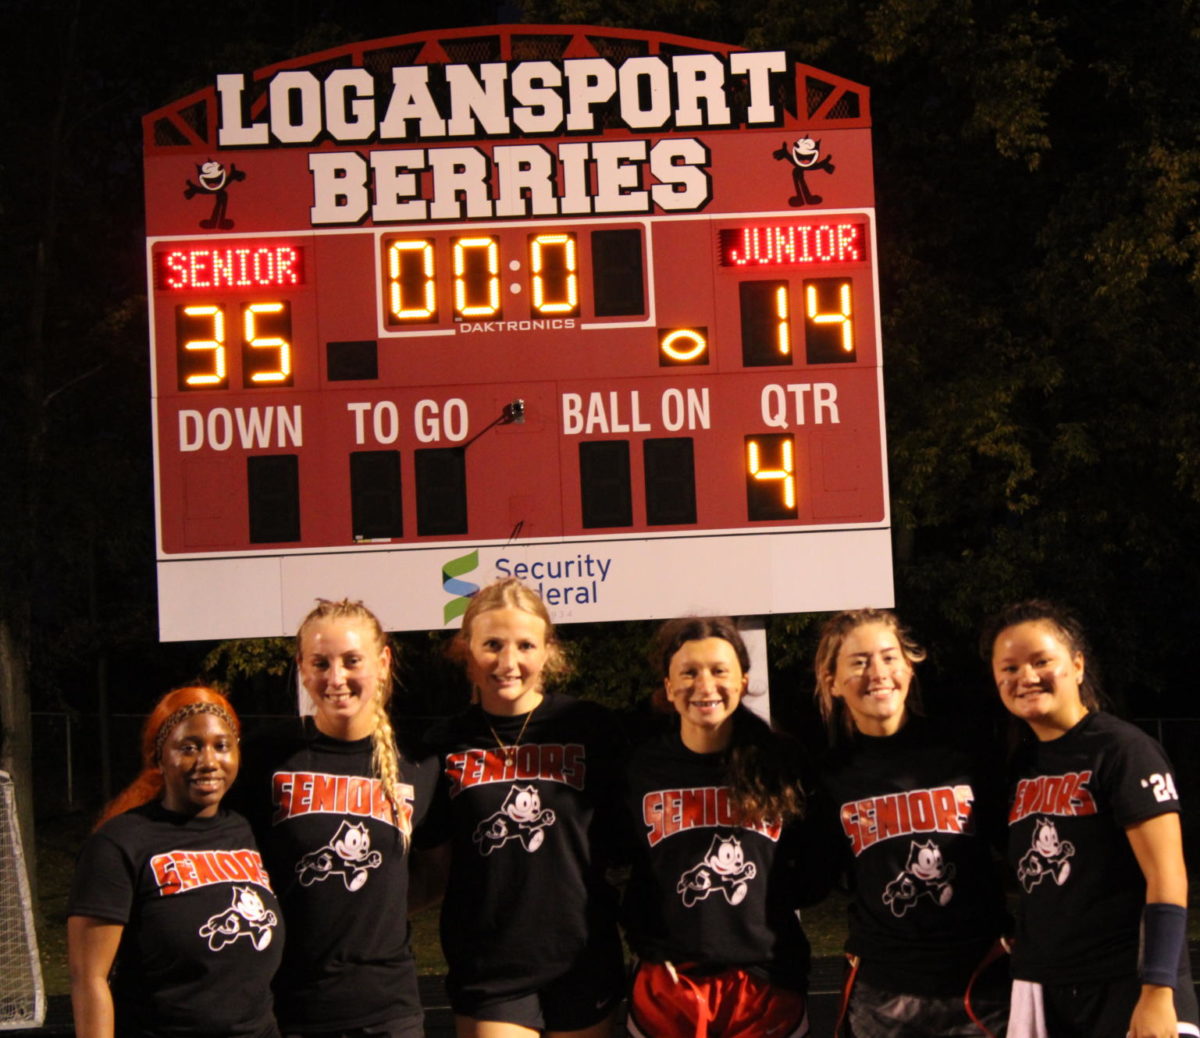 After their win, the Senior Team poses for a photo in front of the scoreboard.